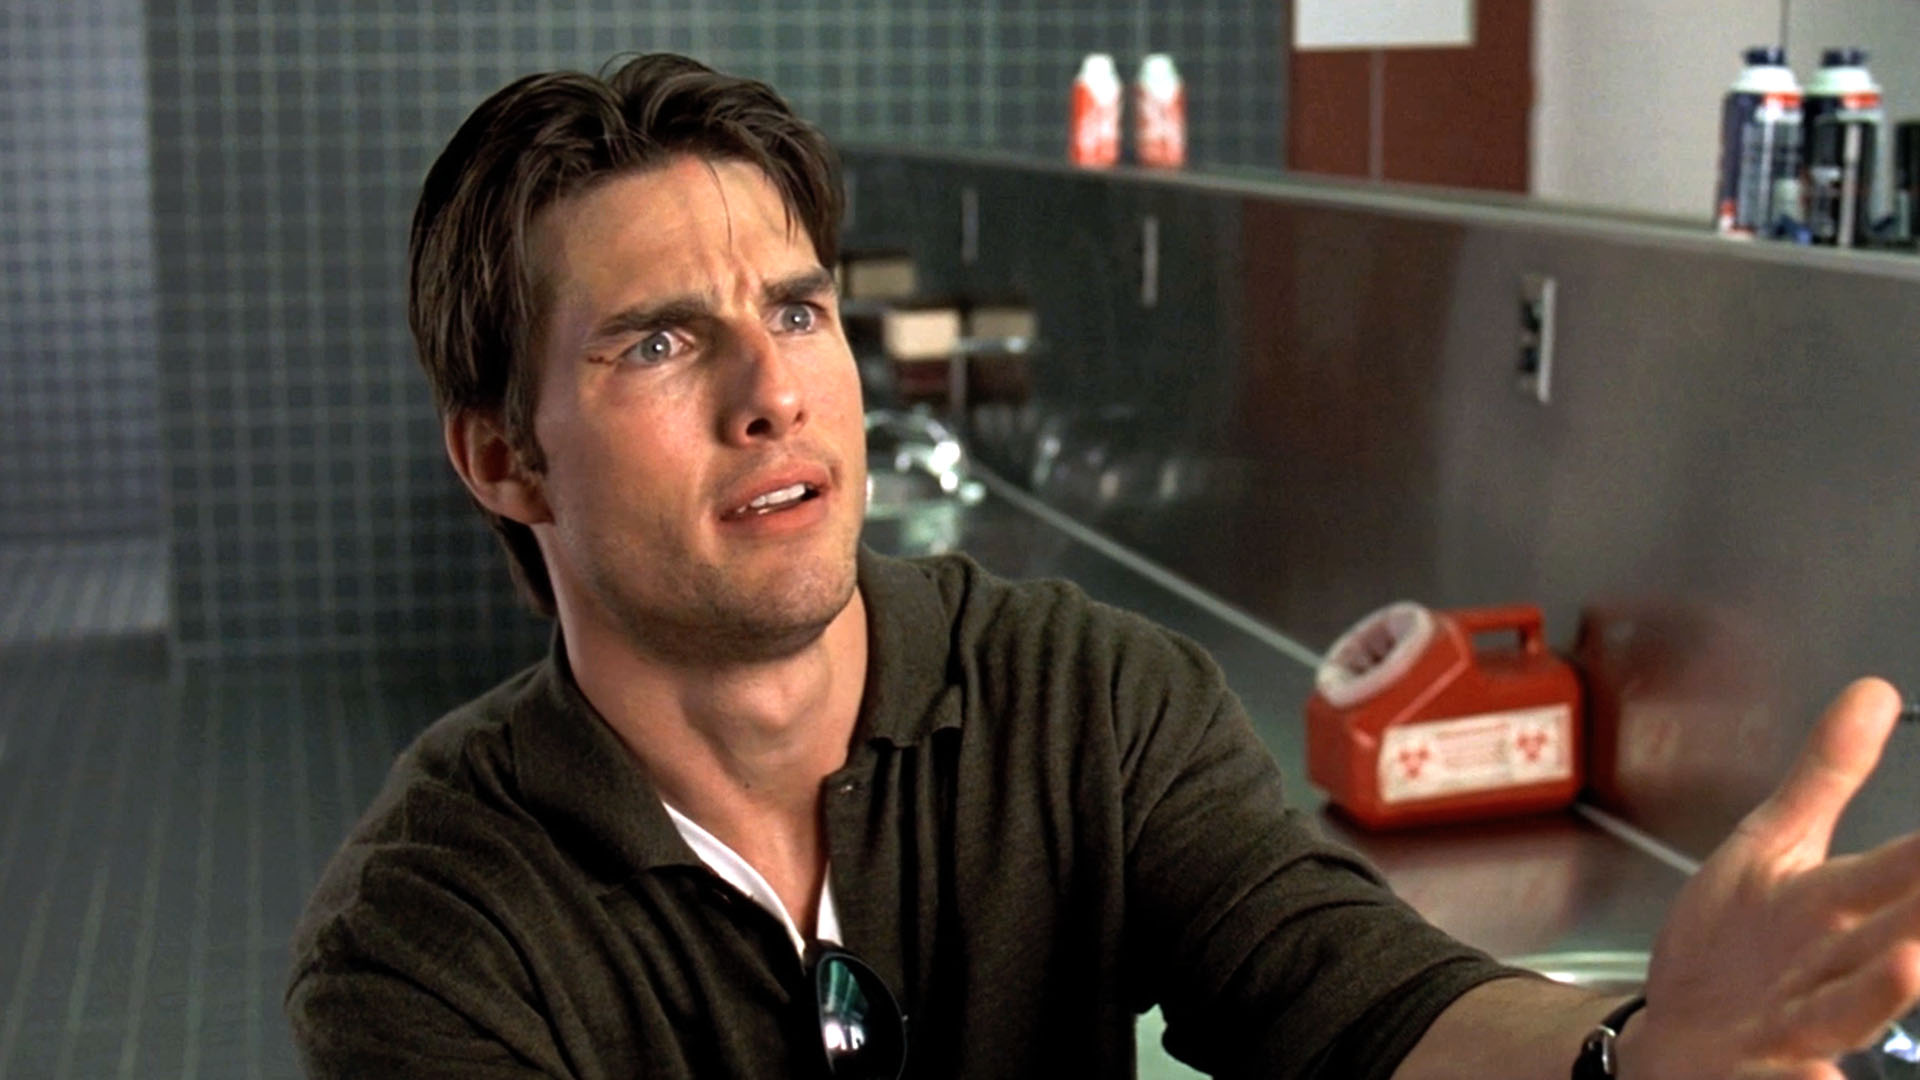 Jerry Maguire: Cruise, One of the world's highest-paid actors, Began acting in the early 1980s. 1920x1080 Full HD Wallpaper.